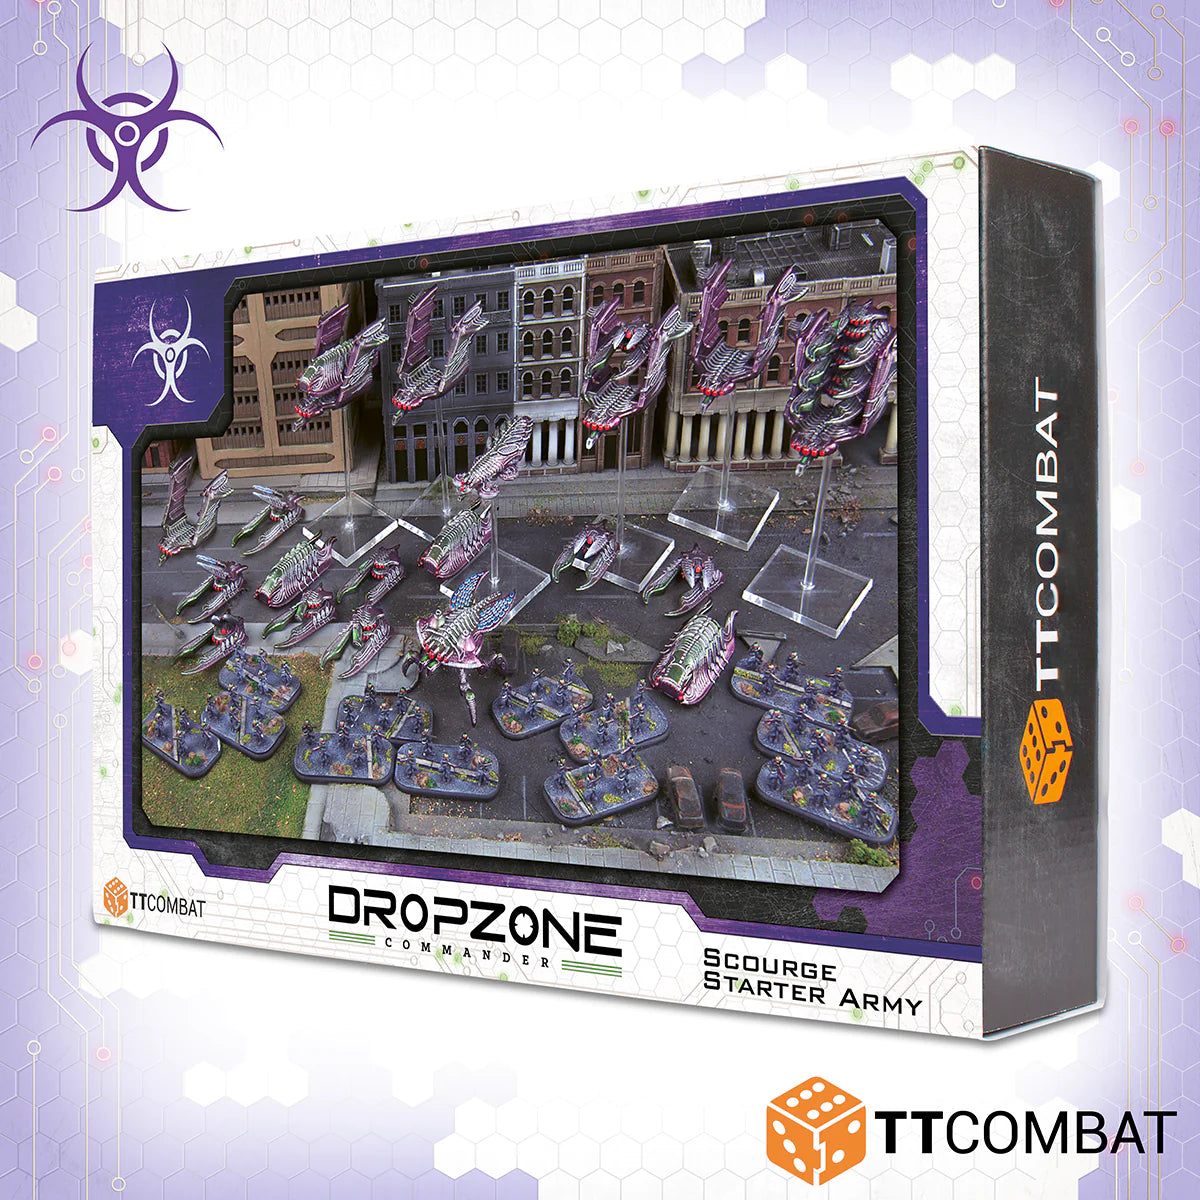 Dropzone Commander: Scourge Starter Army